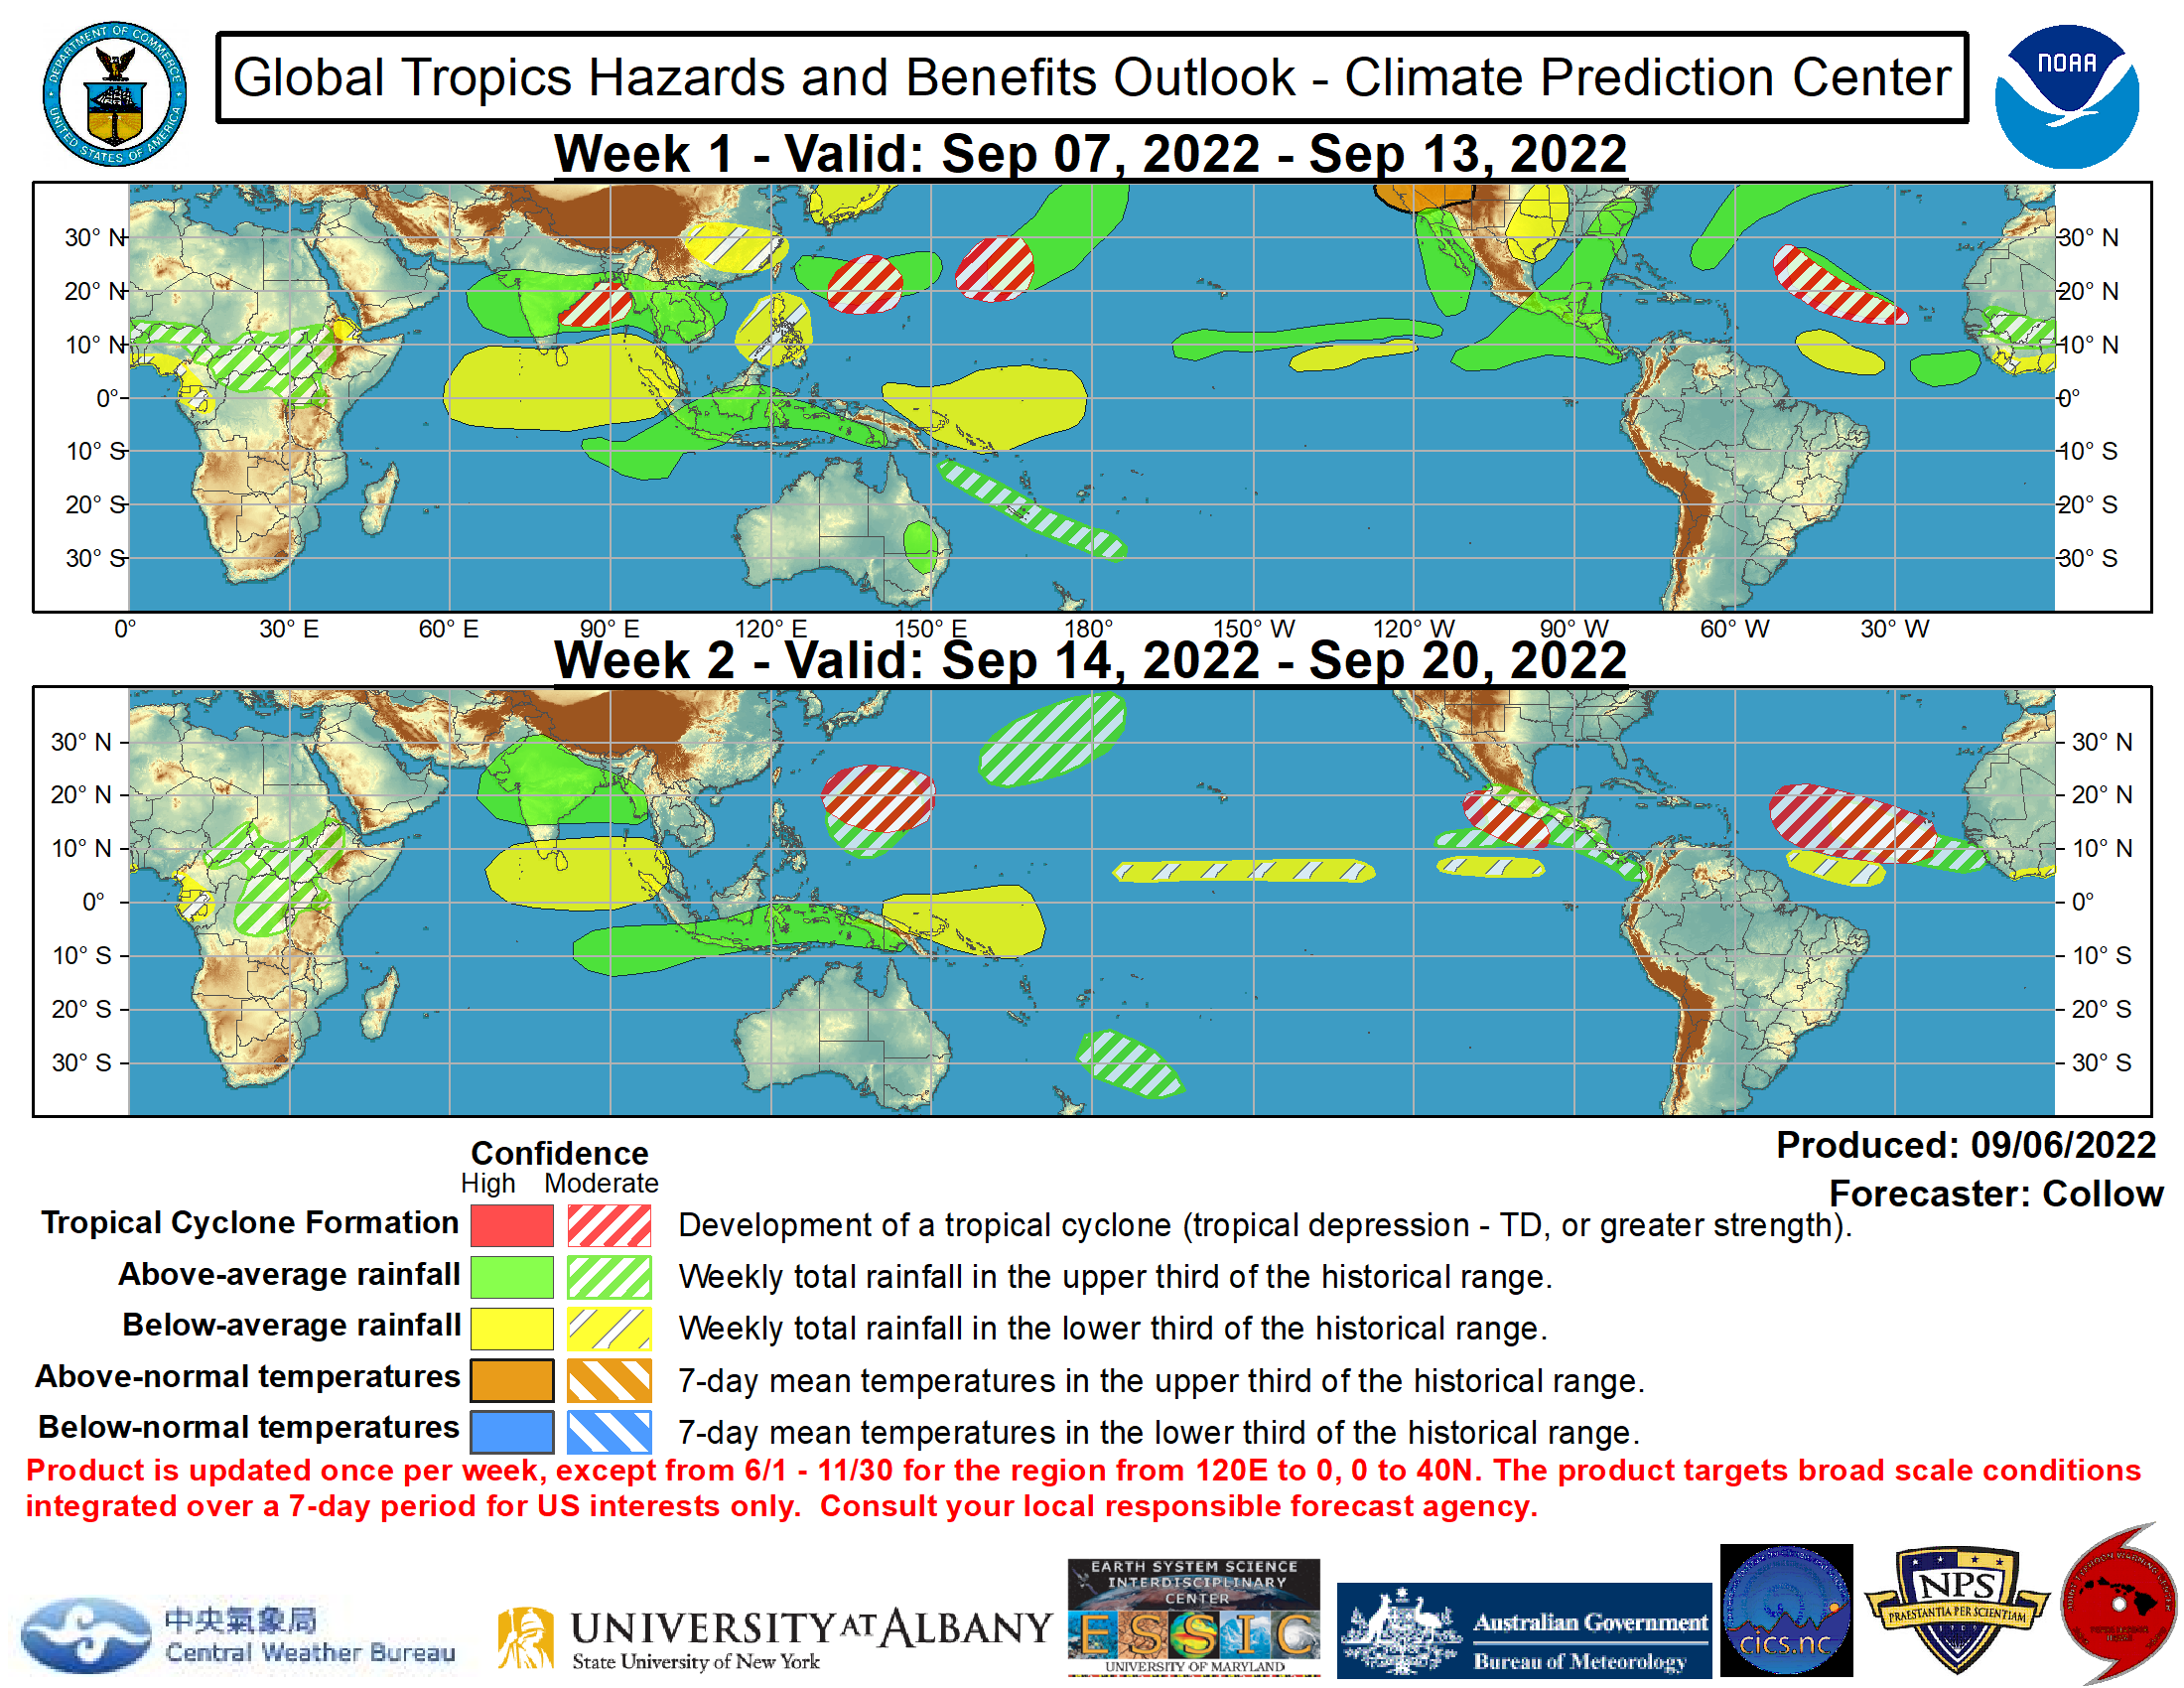 Tropical Cyclone Formation Potential